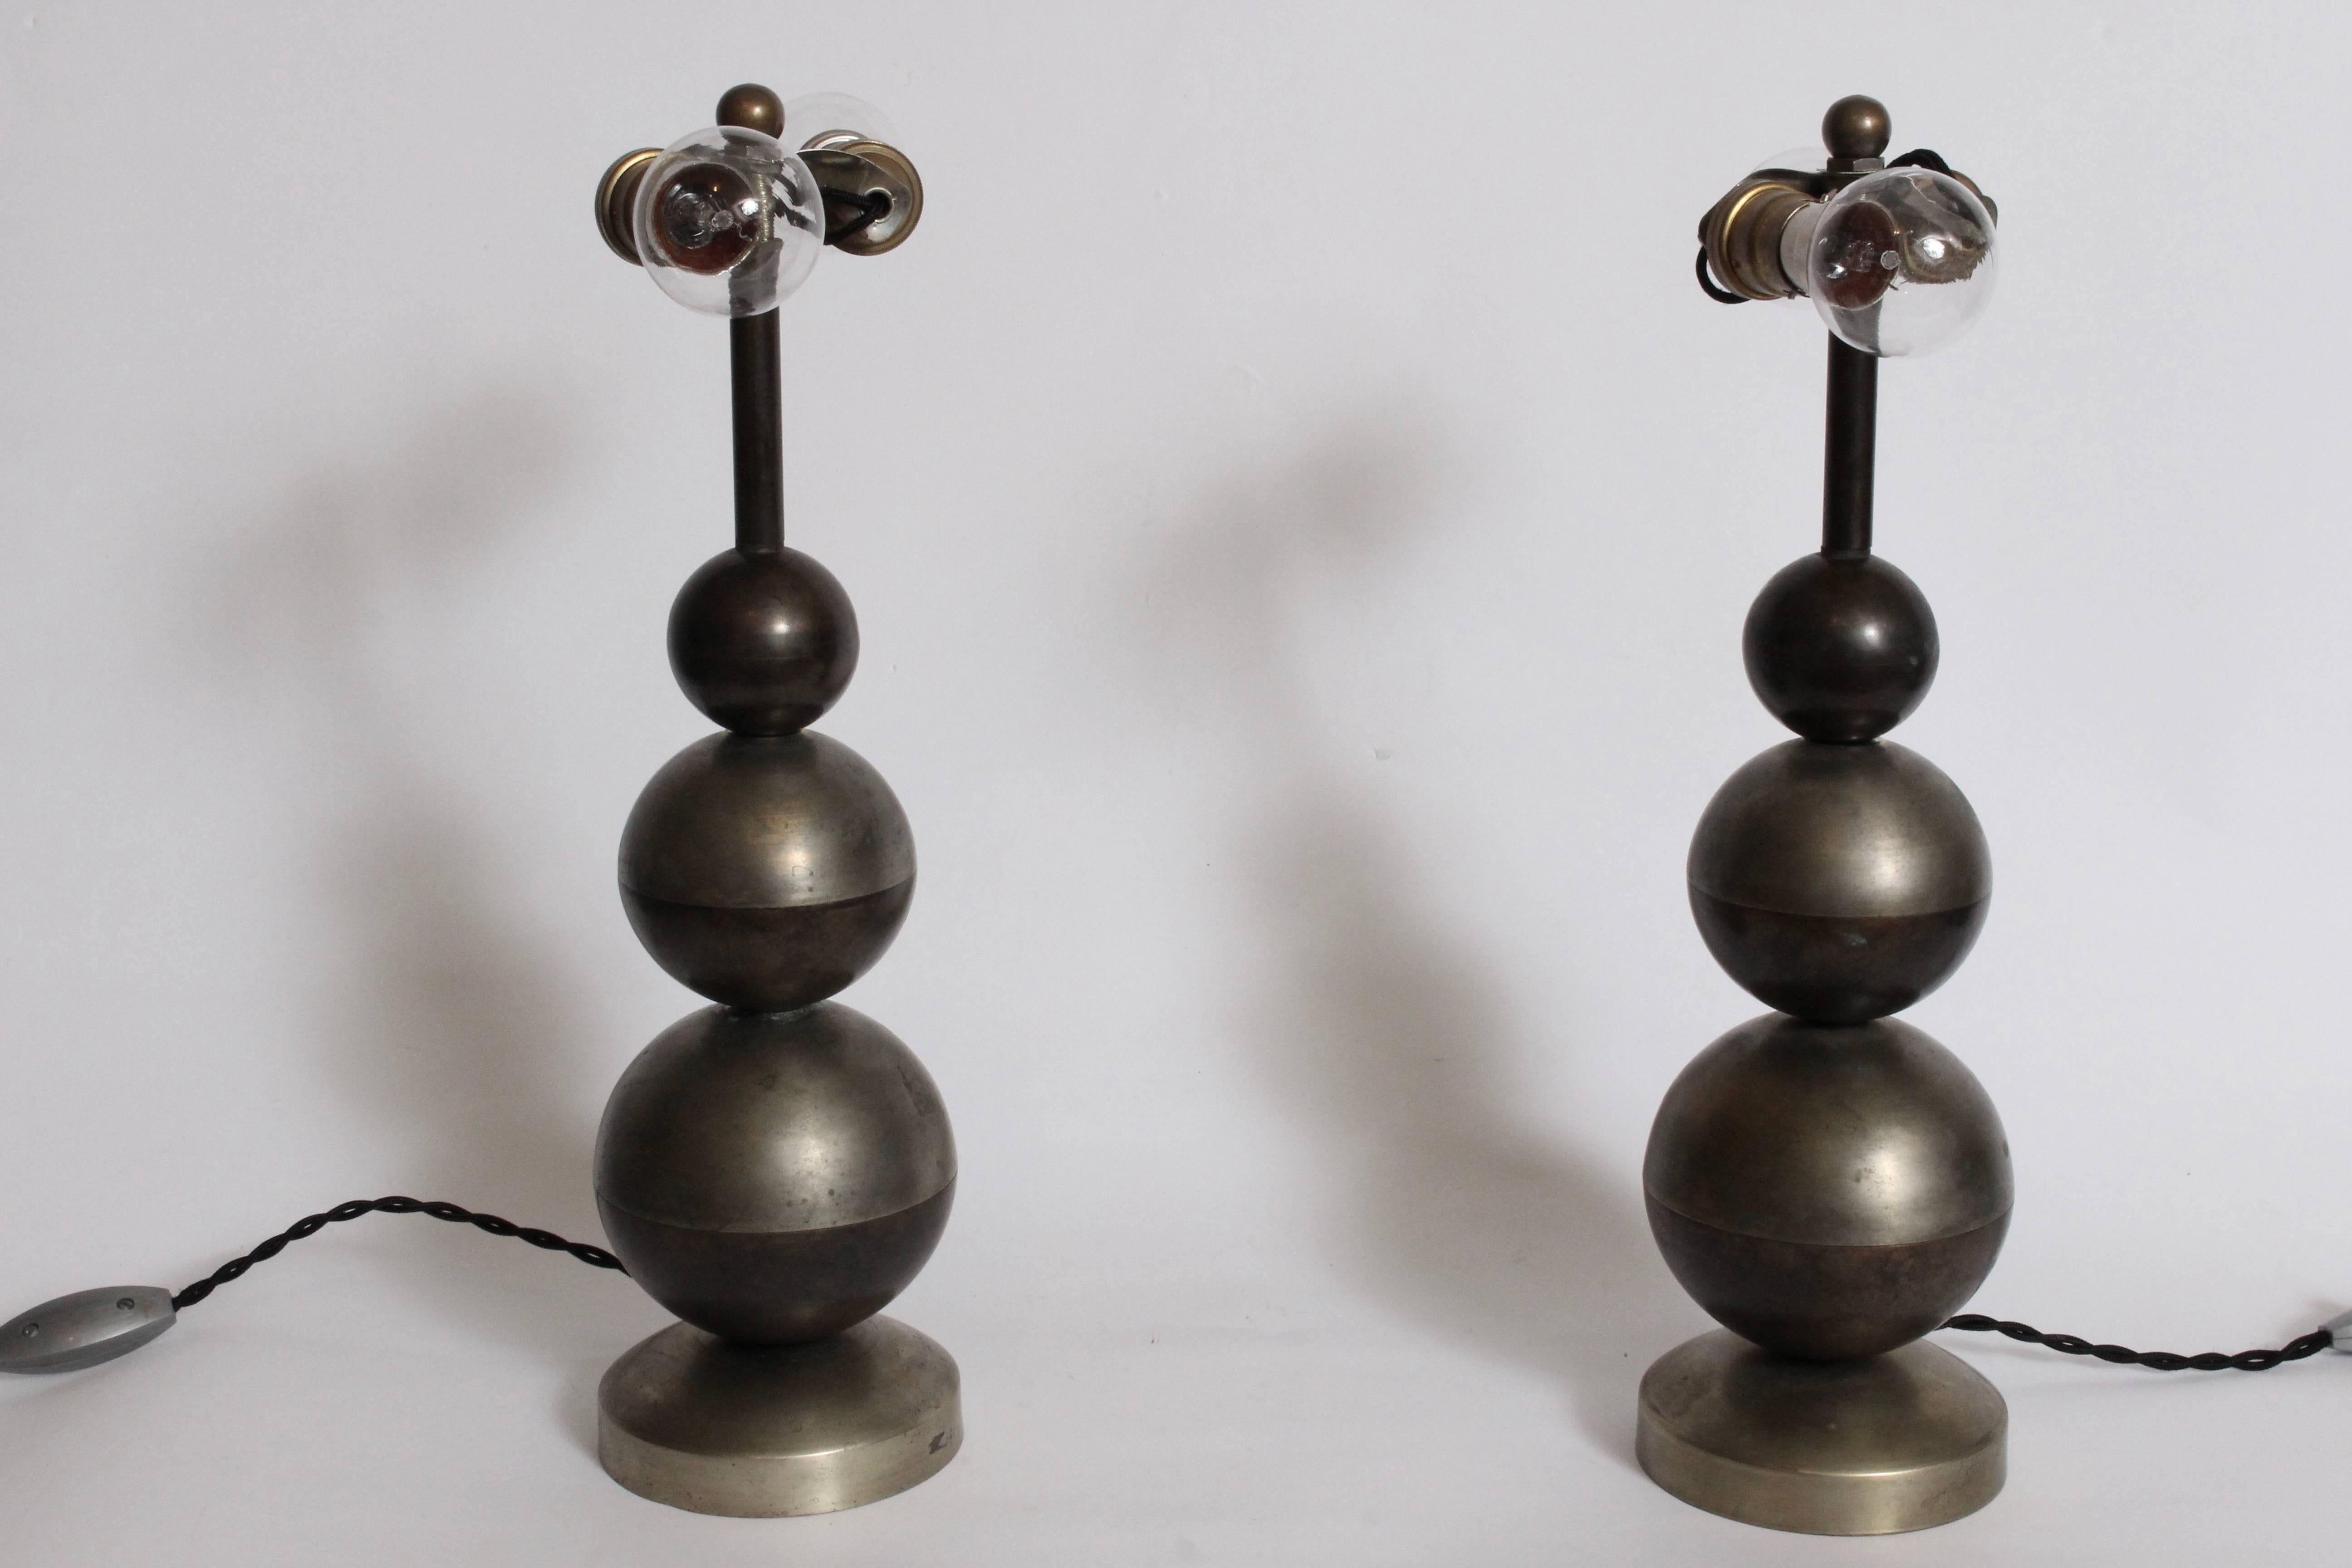 Pair of Jean Boris Lacroix style triple ball nickel-plated brass table lamps with brass shades. Featuring triple stacked ball form with top half in nickel plate and bottom half in brass. Nickel-plated spun Brass dome shade exterior with brass